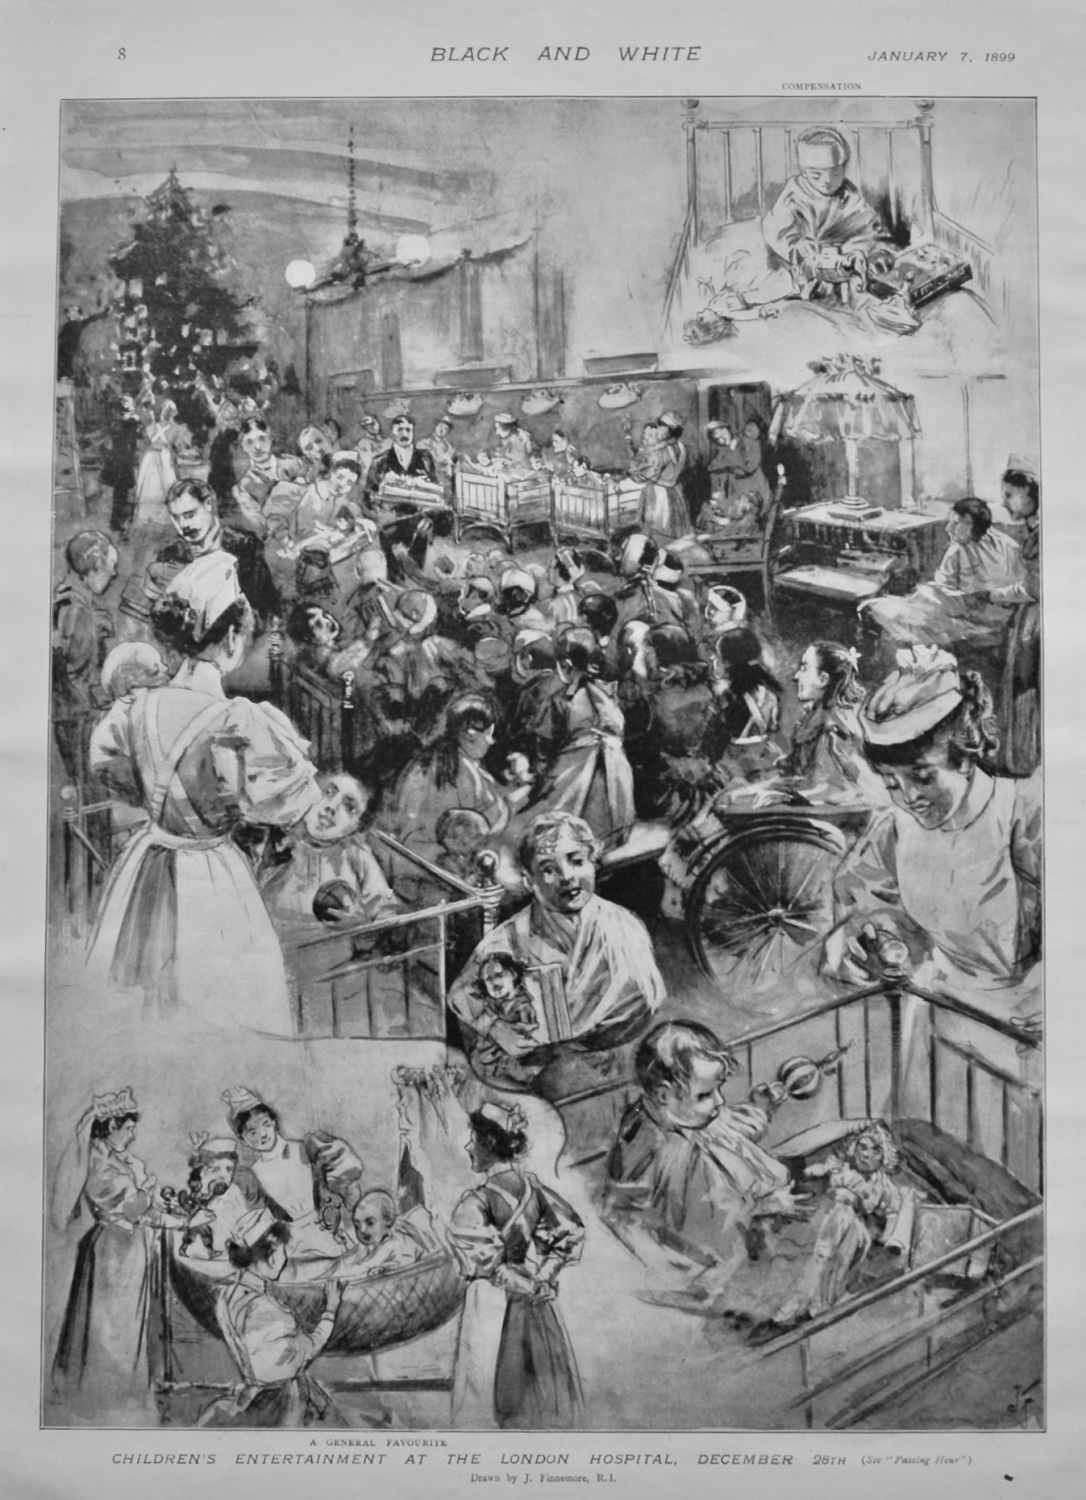 Children's Entertainment at the London Hospital, December 28th 1898.